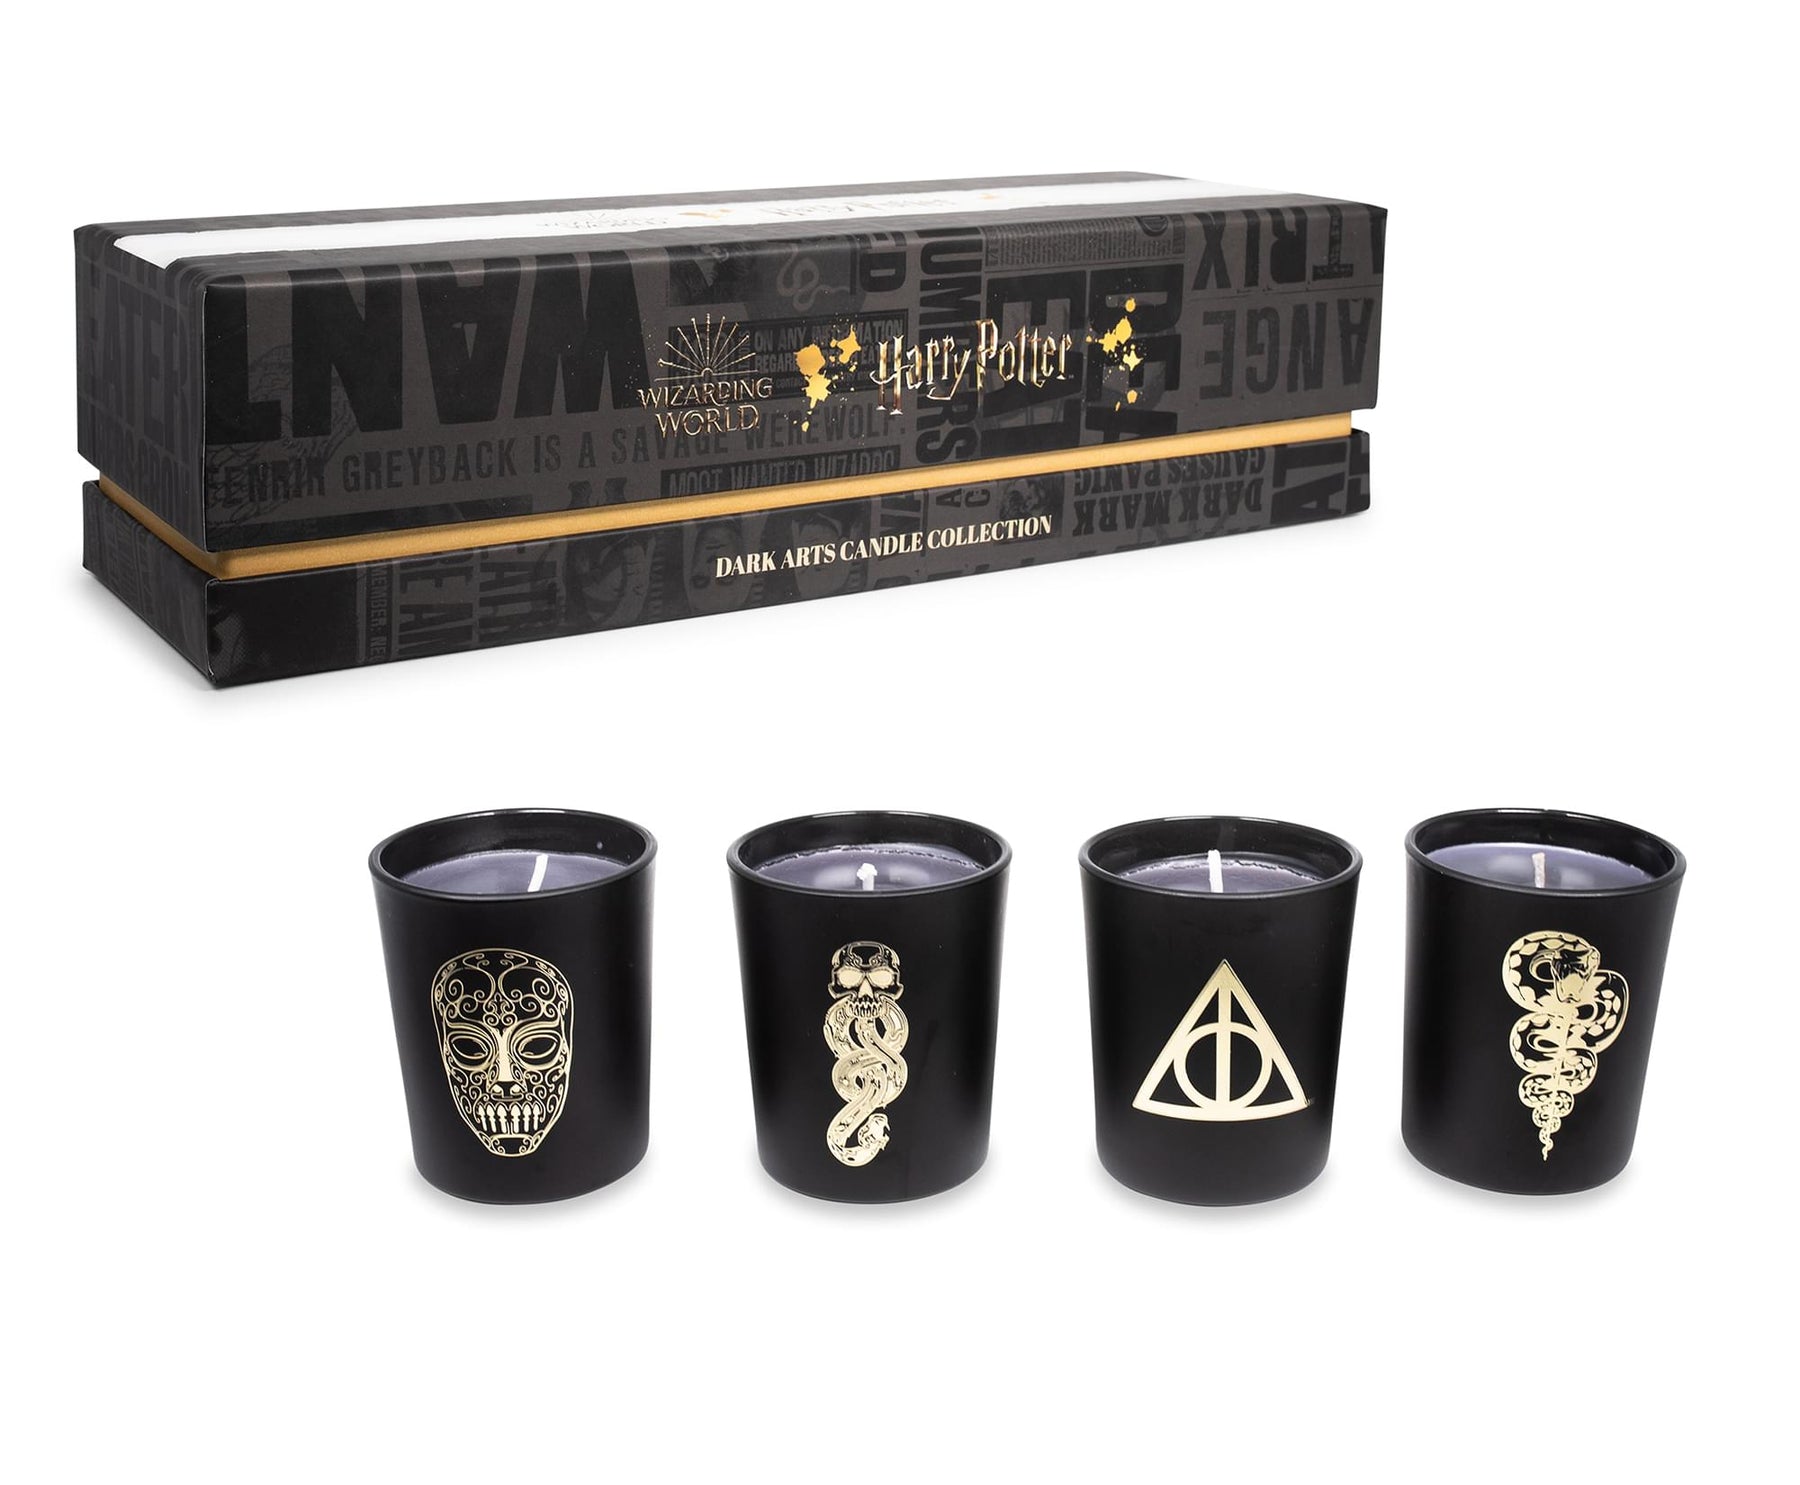 Harry Potter Dark Arts Scented Soy Wax Candle Collection | Set of 4